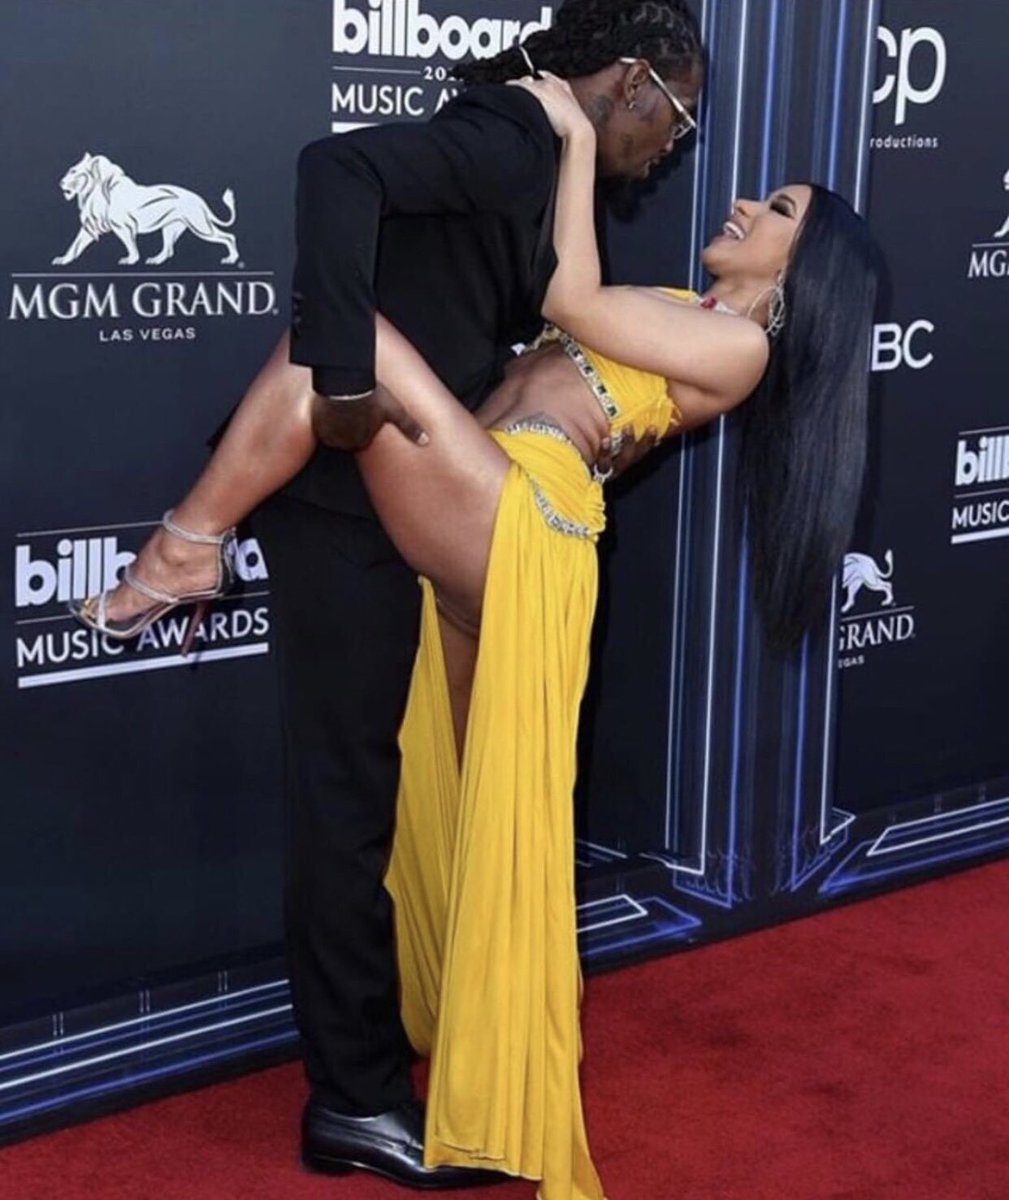 Cardi B at #BillboardMusicAwards2019 wasn’t happy about this coochie pictur...